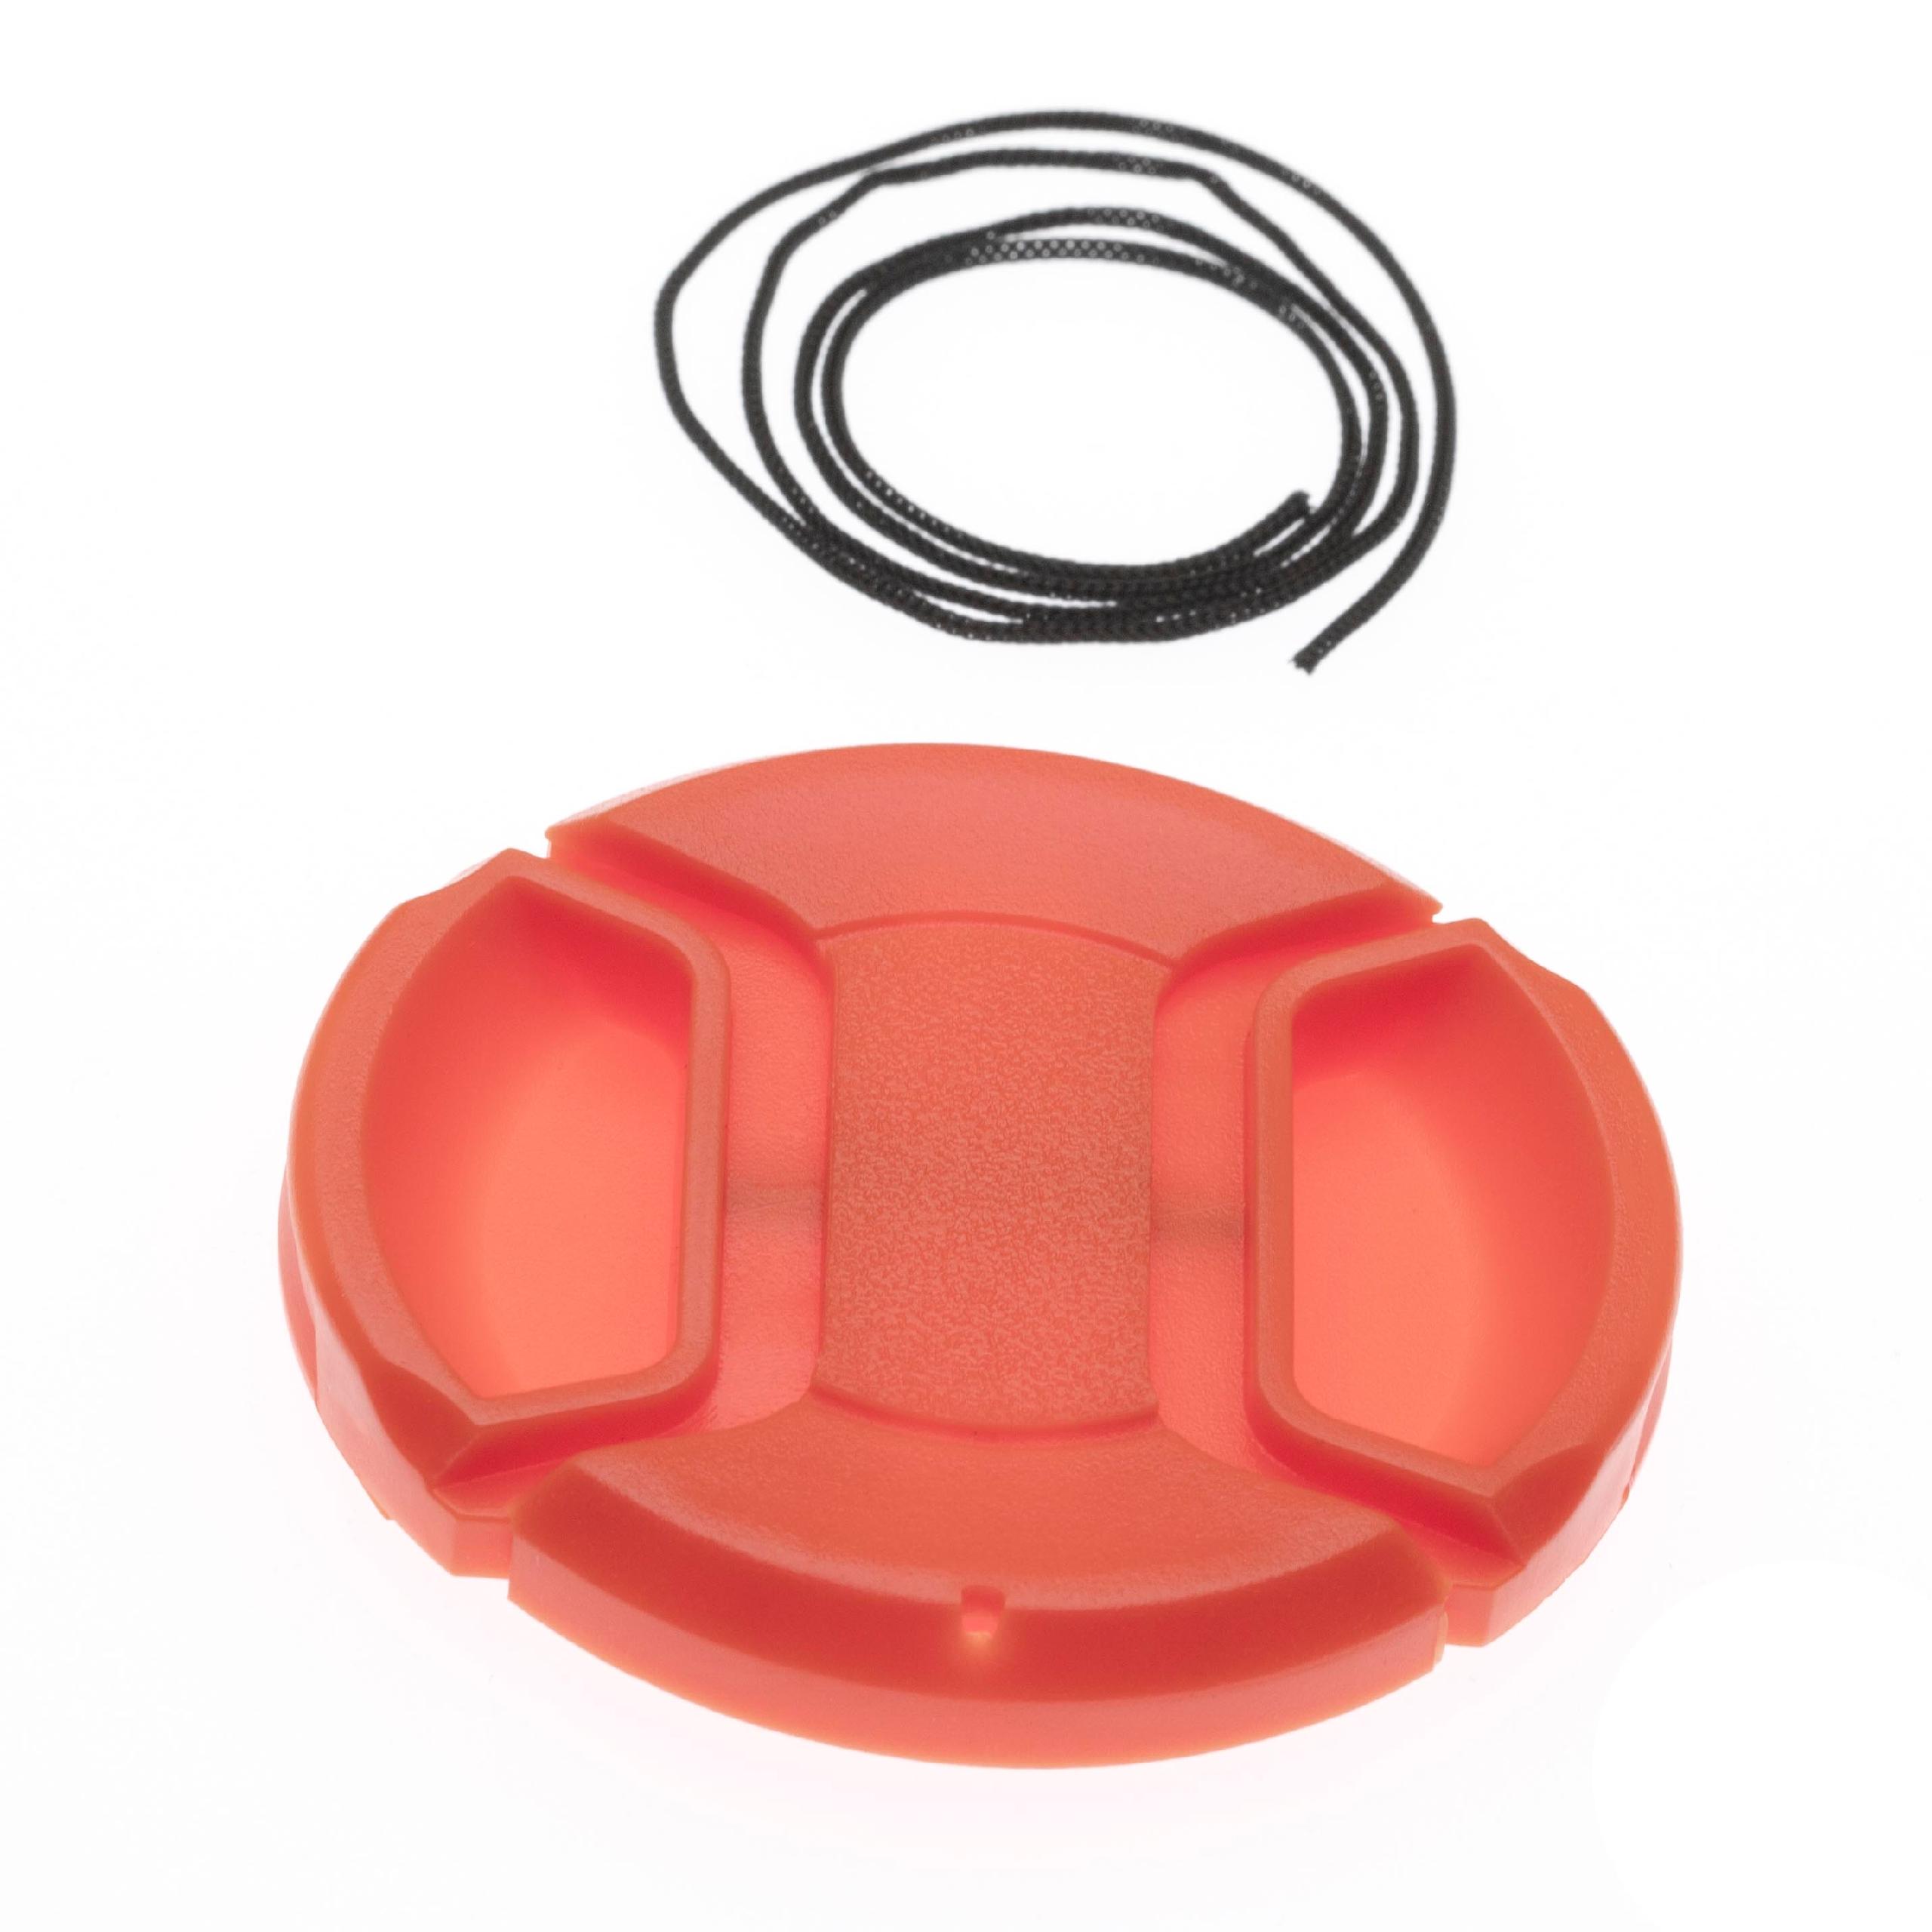 Lens Cap 55 mm - with Inner Handle, Plastic, Red